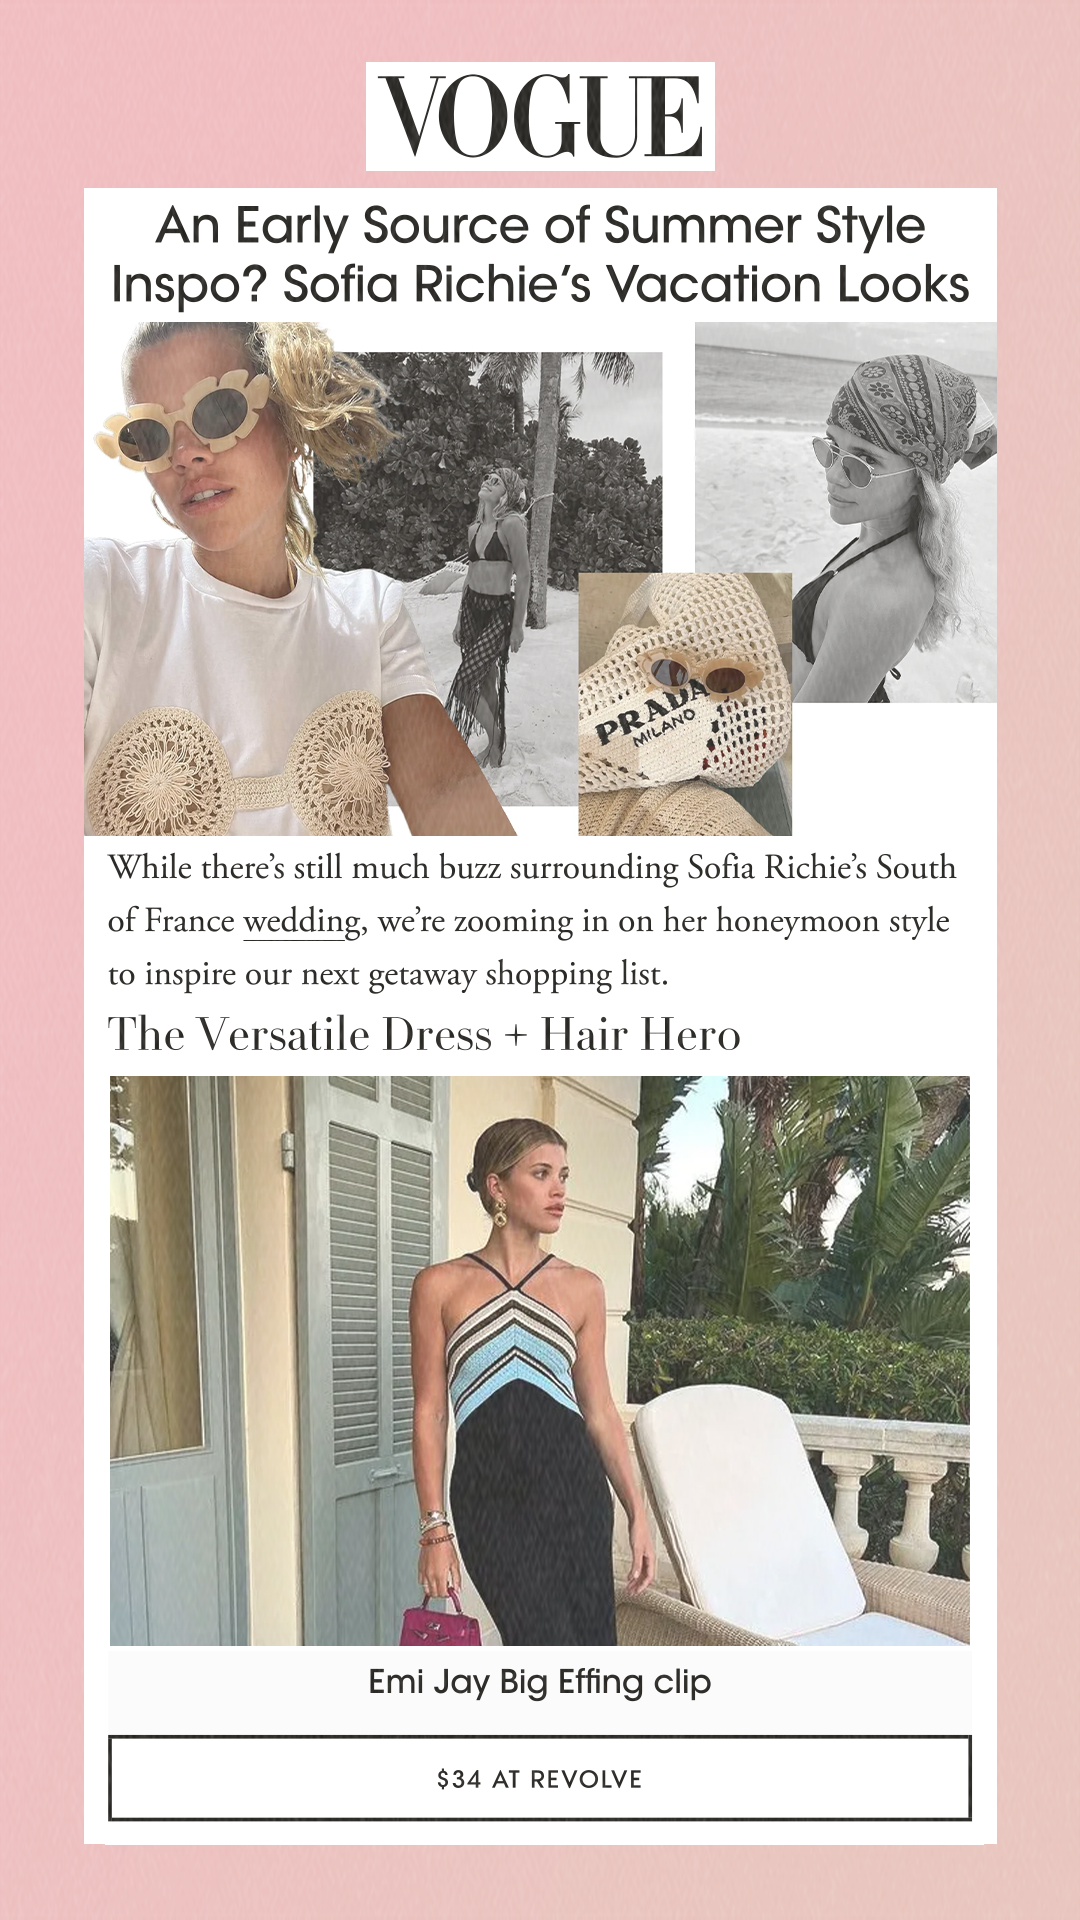 An Early Source of Summer Style Inspo? Sofia Richie’s Vacation Looks While there’s still much buzz surrounding Sofia Richie’s South of France wedding, we’re zooming in on her honeymoon style to inspire our next getaway shopping list. The Versatile Dress + Hair Hero Emi Jay Big Effing Clip $34 at REVOLVE